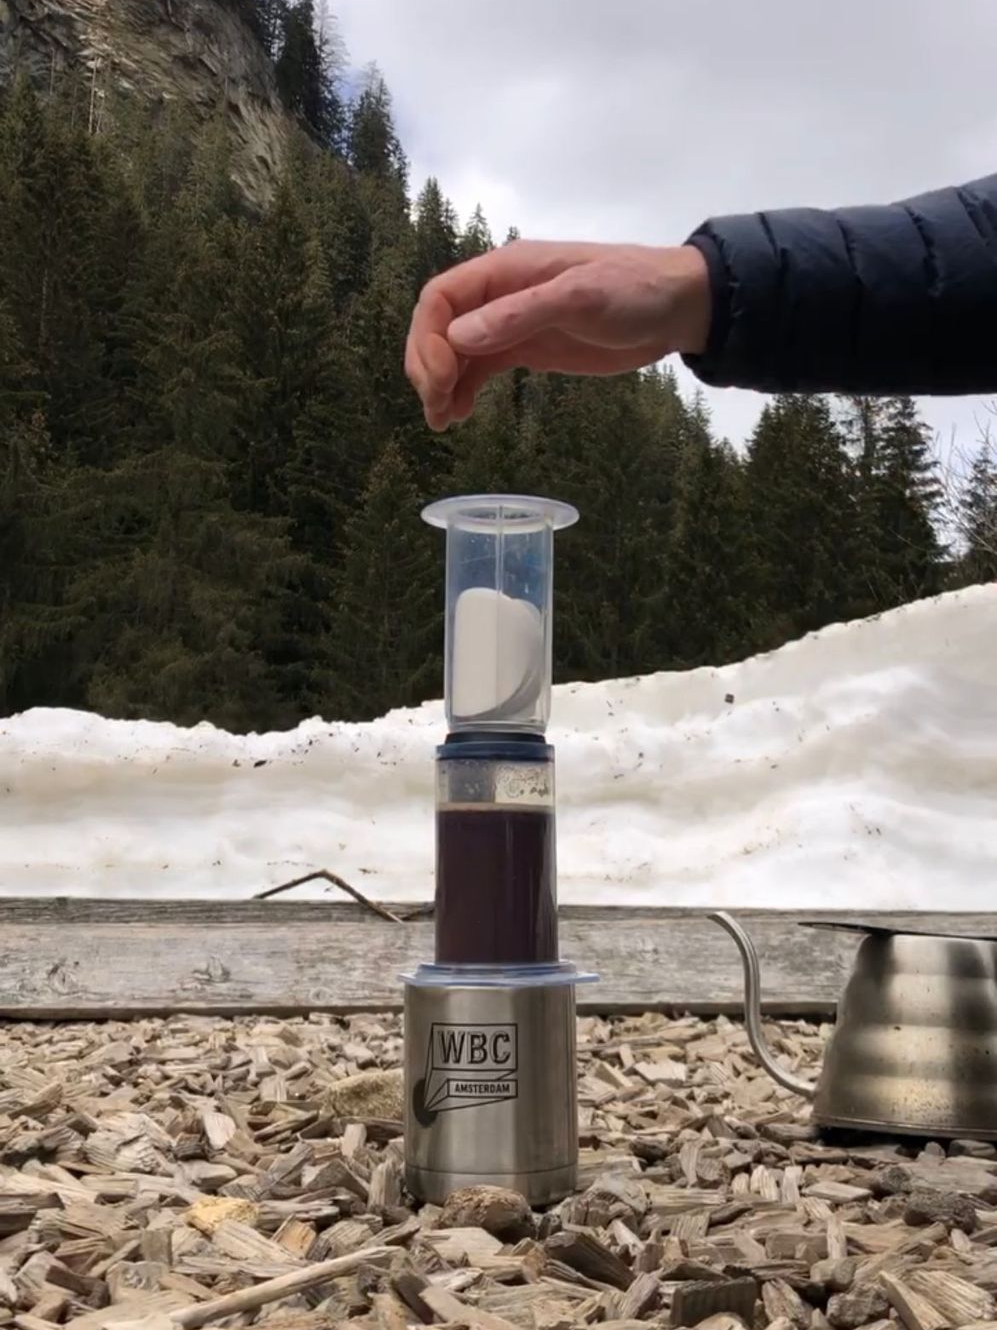 Lex has an AeroPress with coffee in it, laid on top of a metal travel mug, ready to brew. There is snow on the ground, and evergreen trees behind.